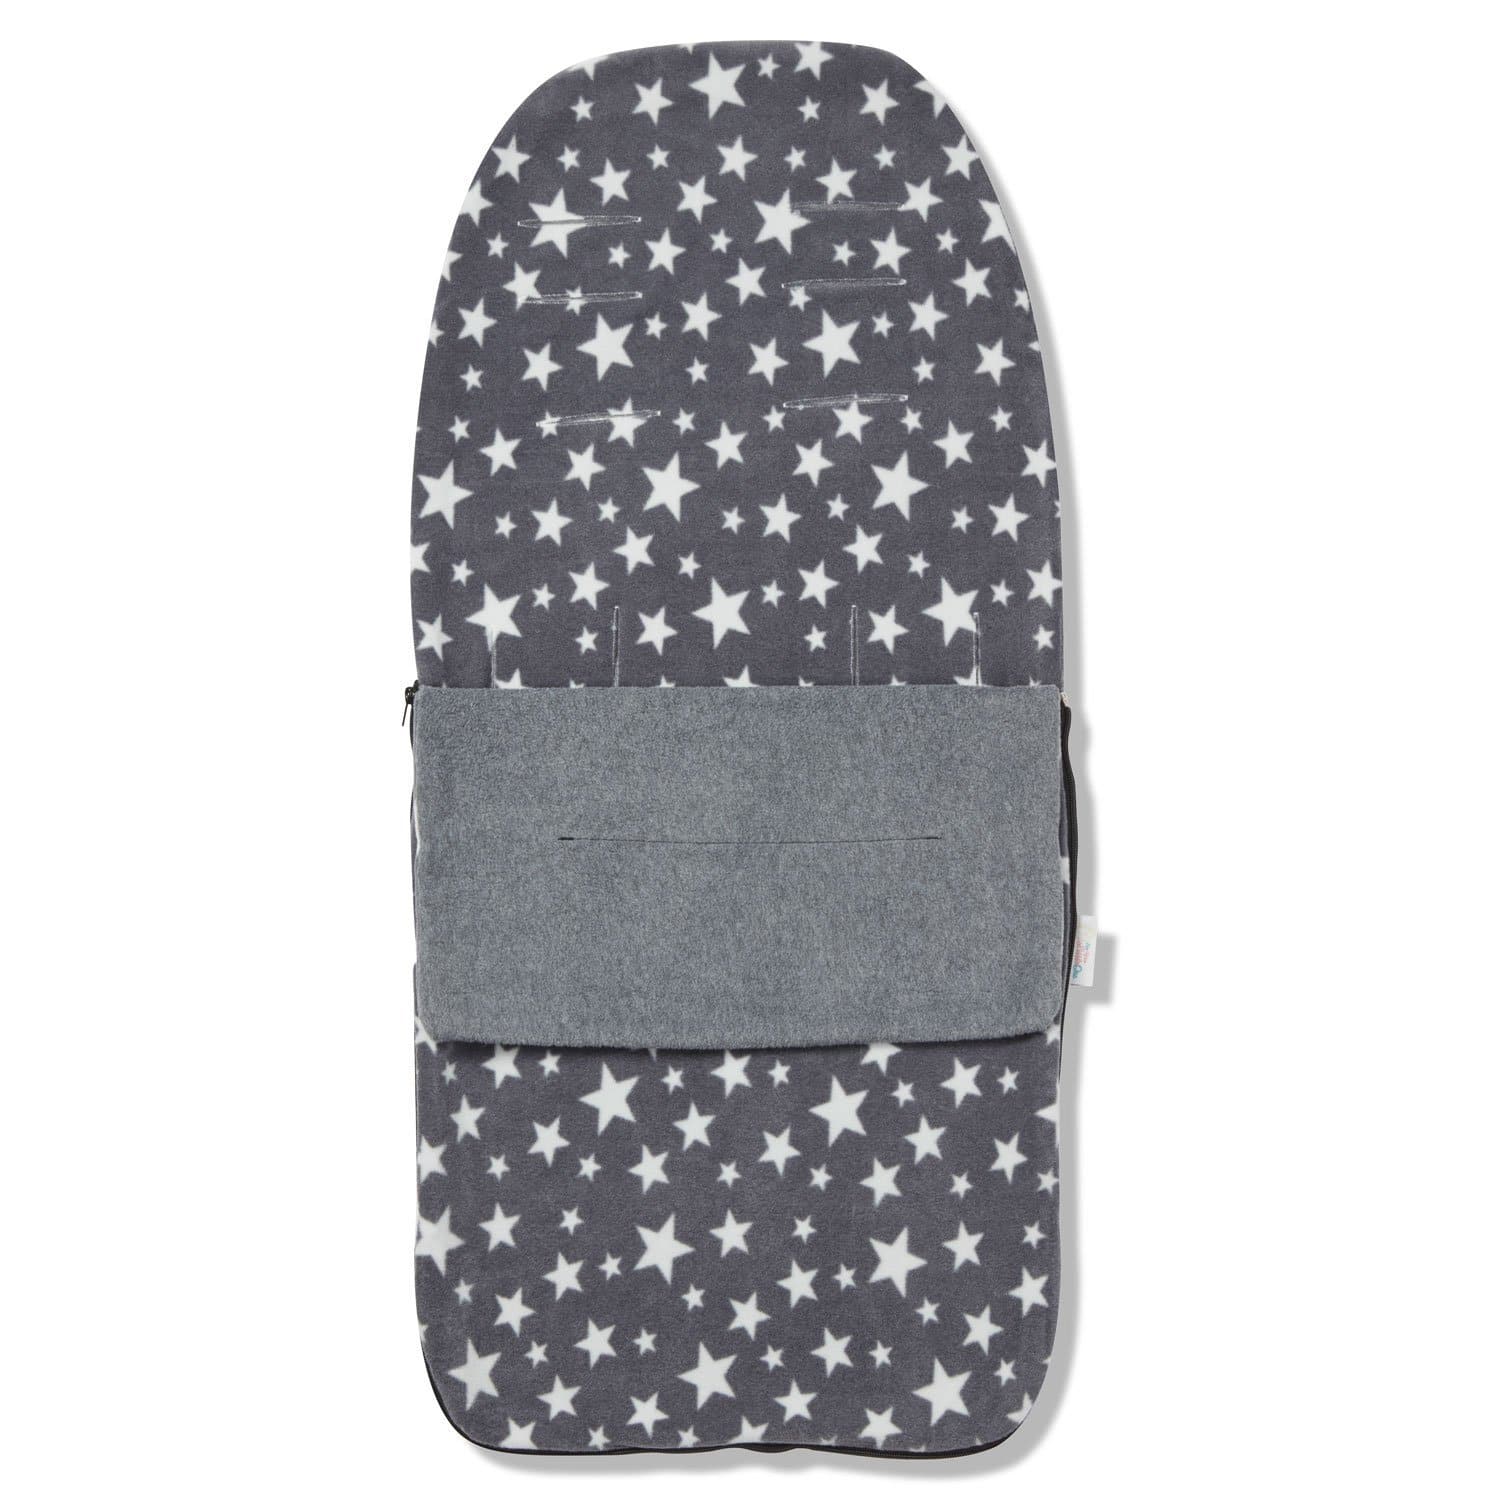 Snuggle Summer Footmuff Compatible with Hybrid - For Your Little One